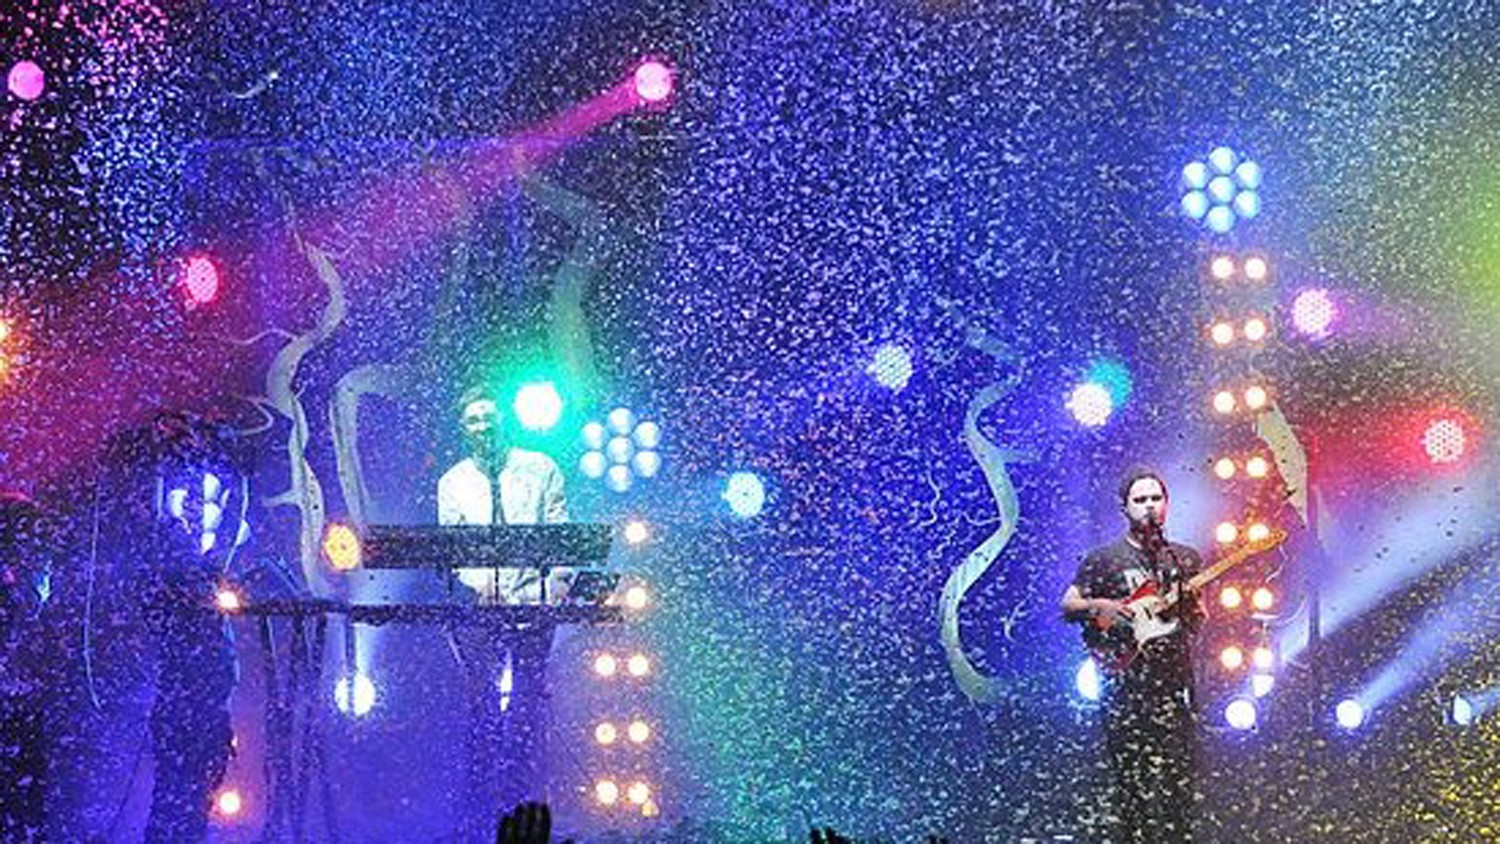 Alt J Gig with Falling Snow Machine Hire from FX Live, Eco Friendly Artificial Snow for music events